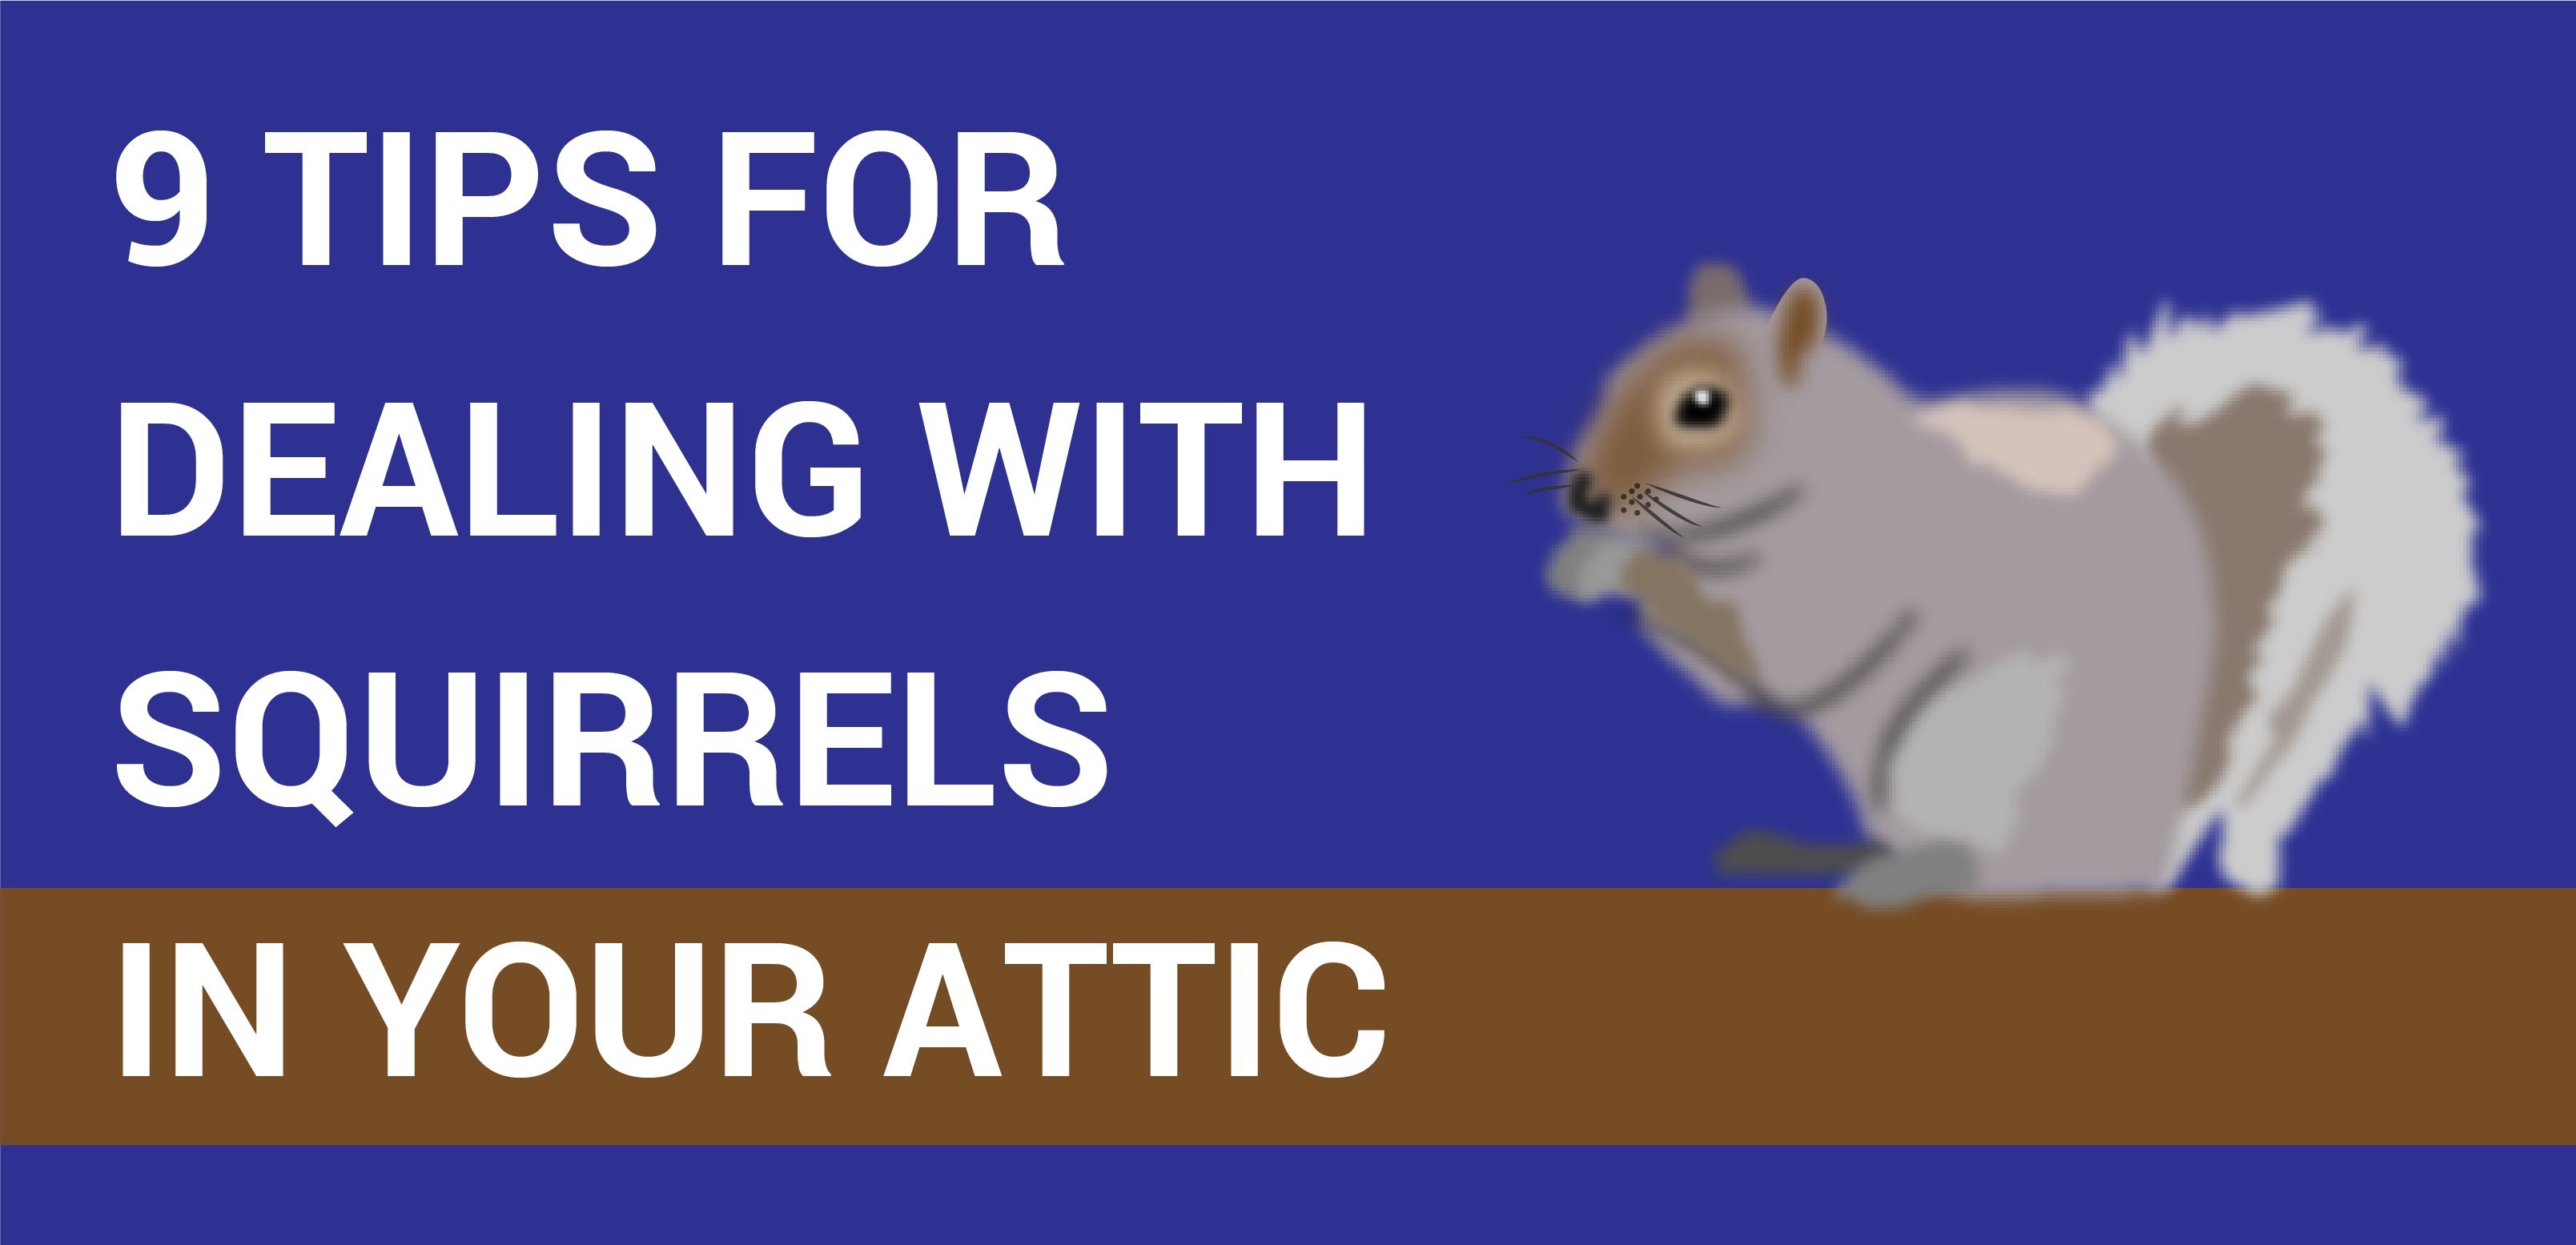 How can i get rid of squirrels in my attic 9 Tips For Dealing With Squirrels In Your Attic